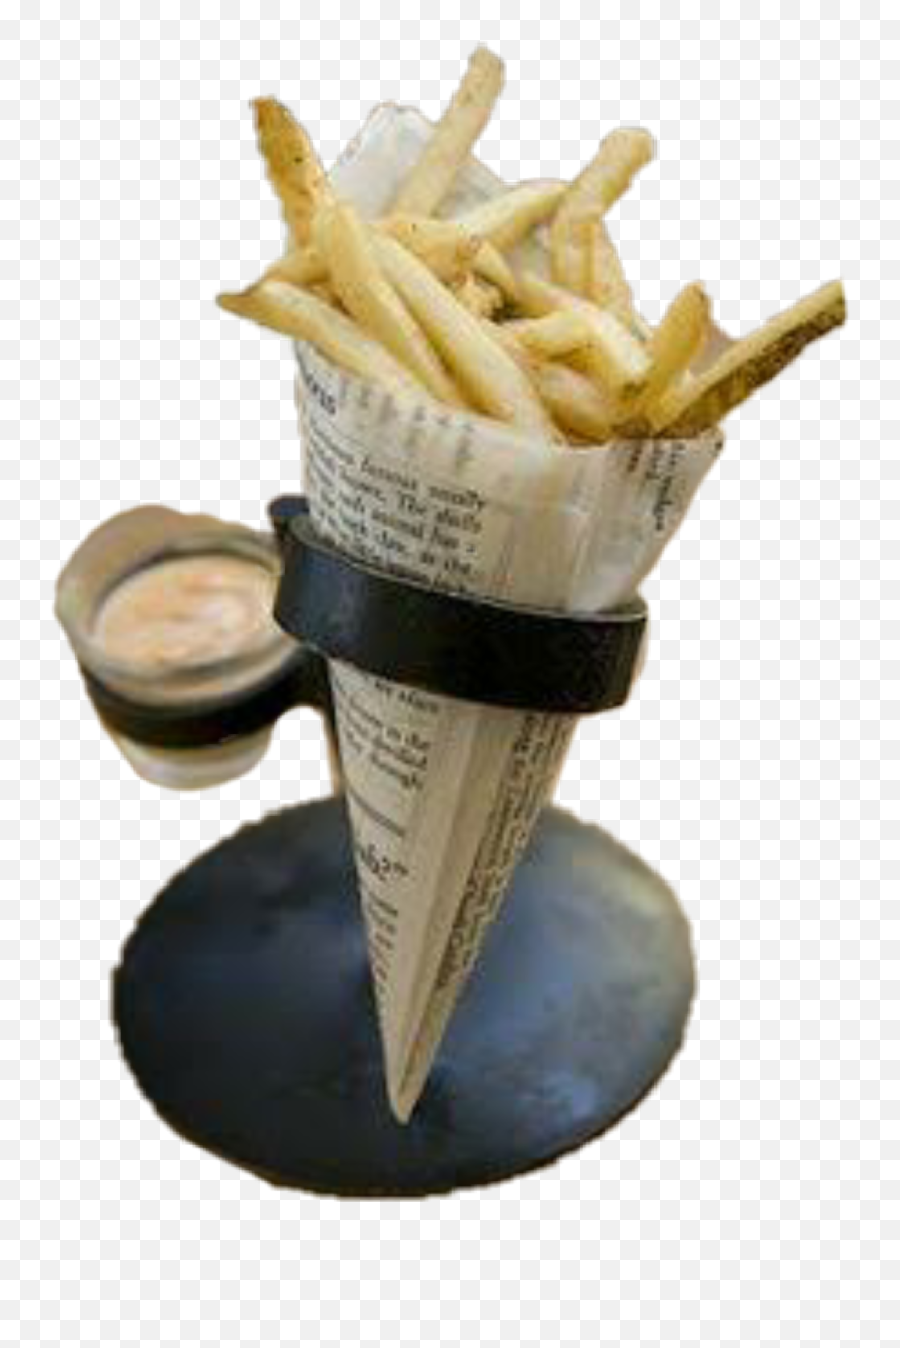 Chips Frenchfries Potatoe - French Fries Cone Paper French Fries In A Cone Emoji,French Fries Emoji